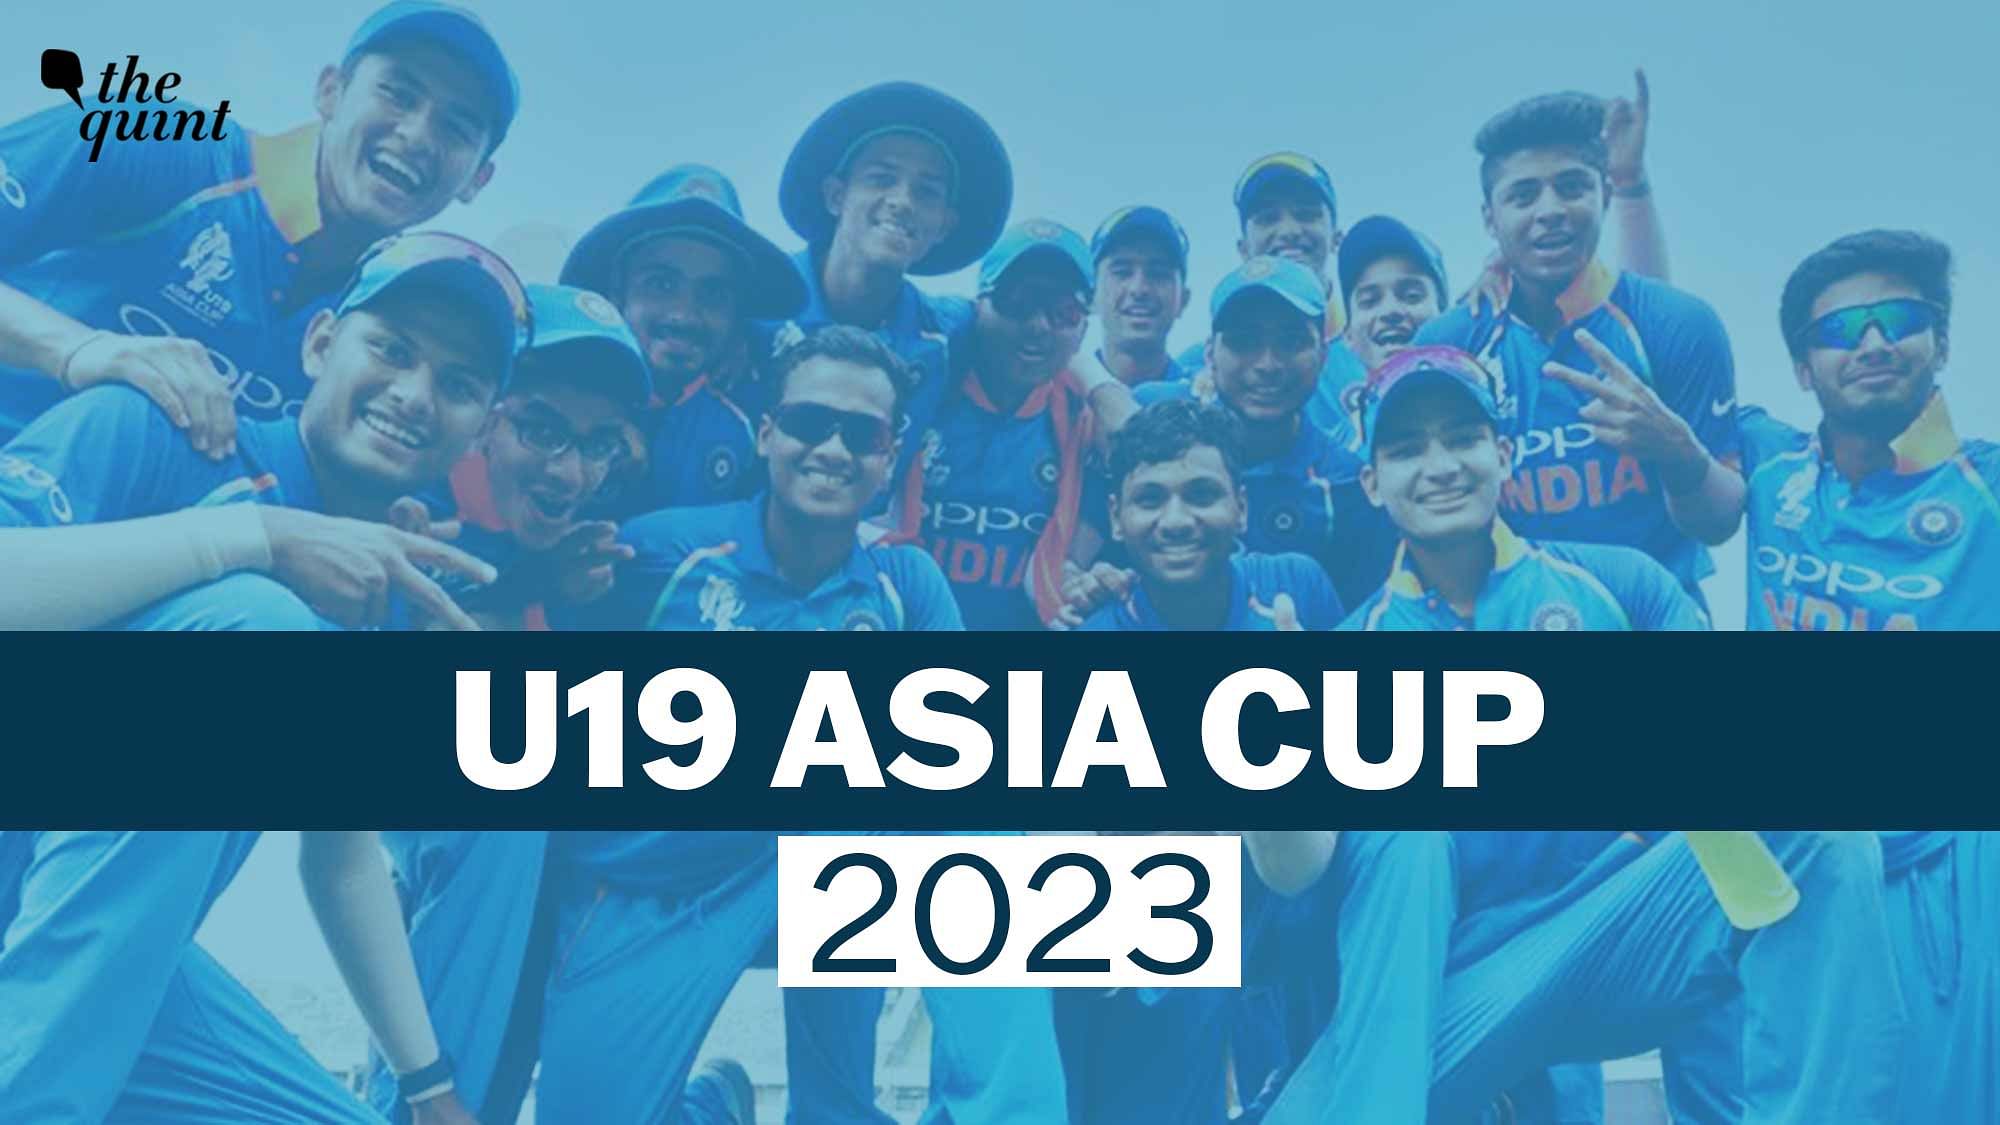 ACC U19 Asia Cup 2023 Schedule Matches, Groups, Venue, Timings, Live